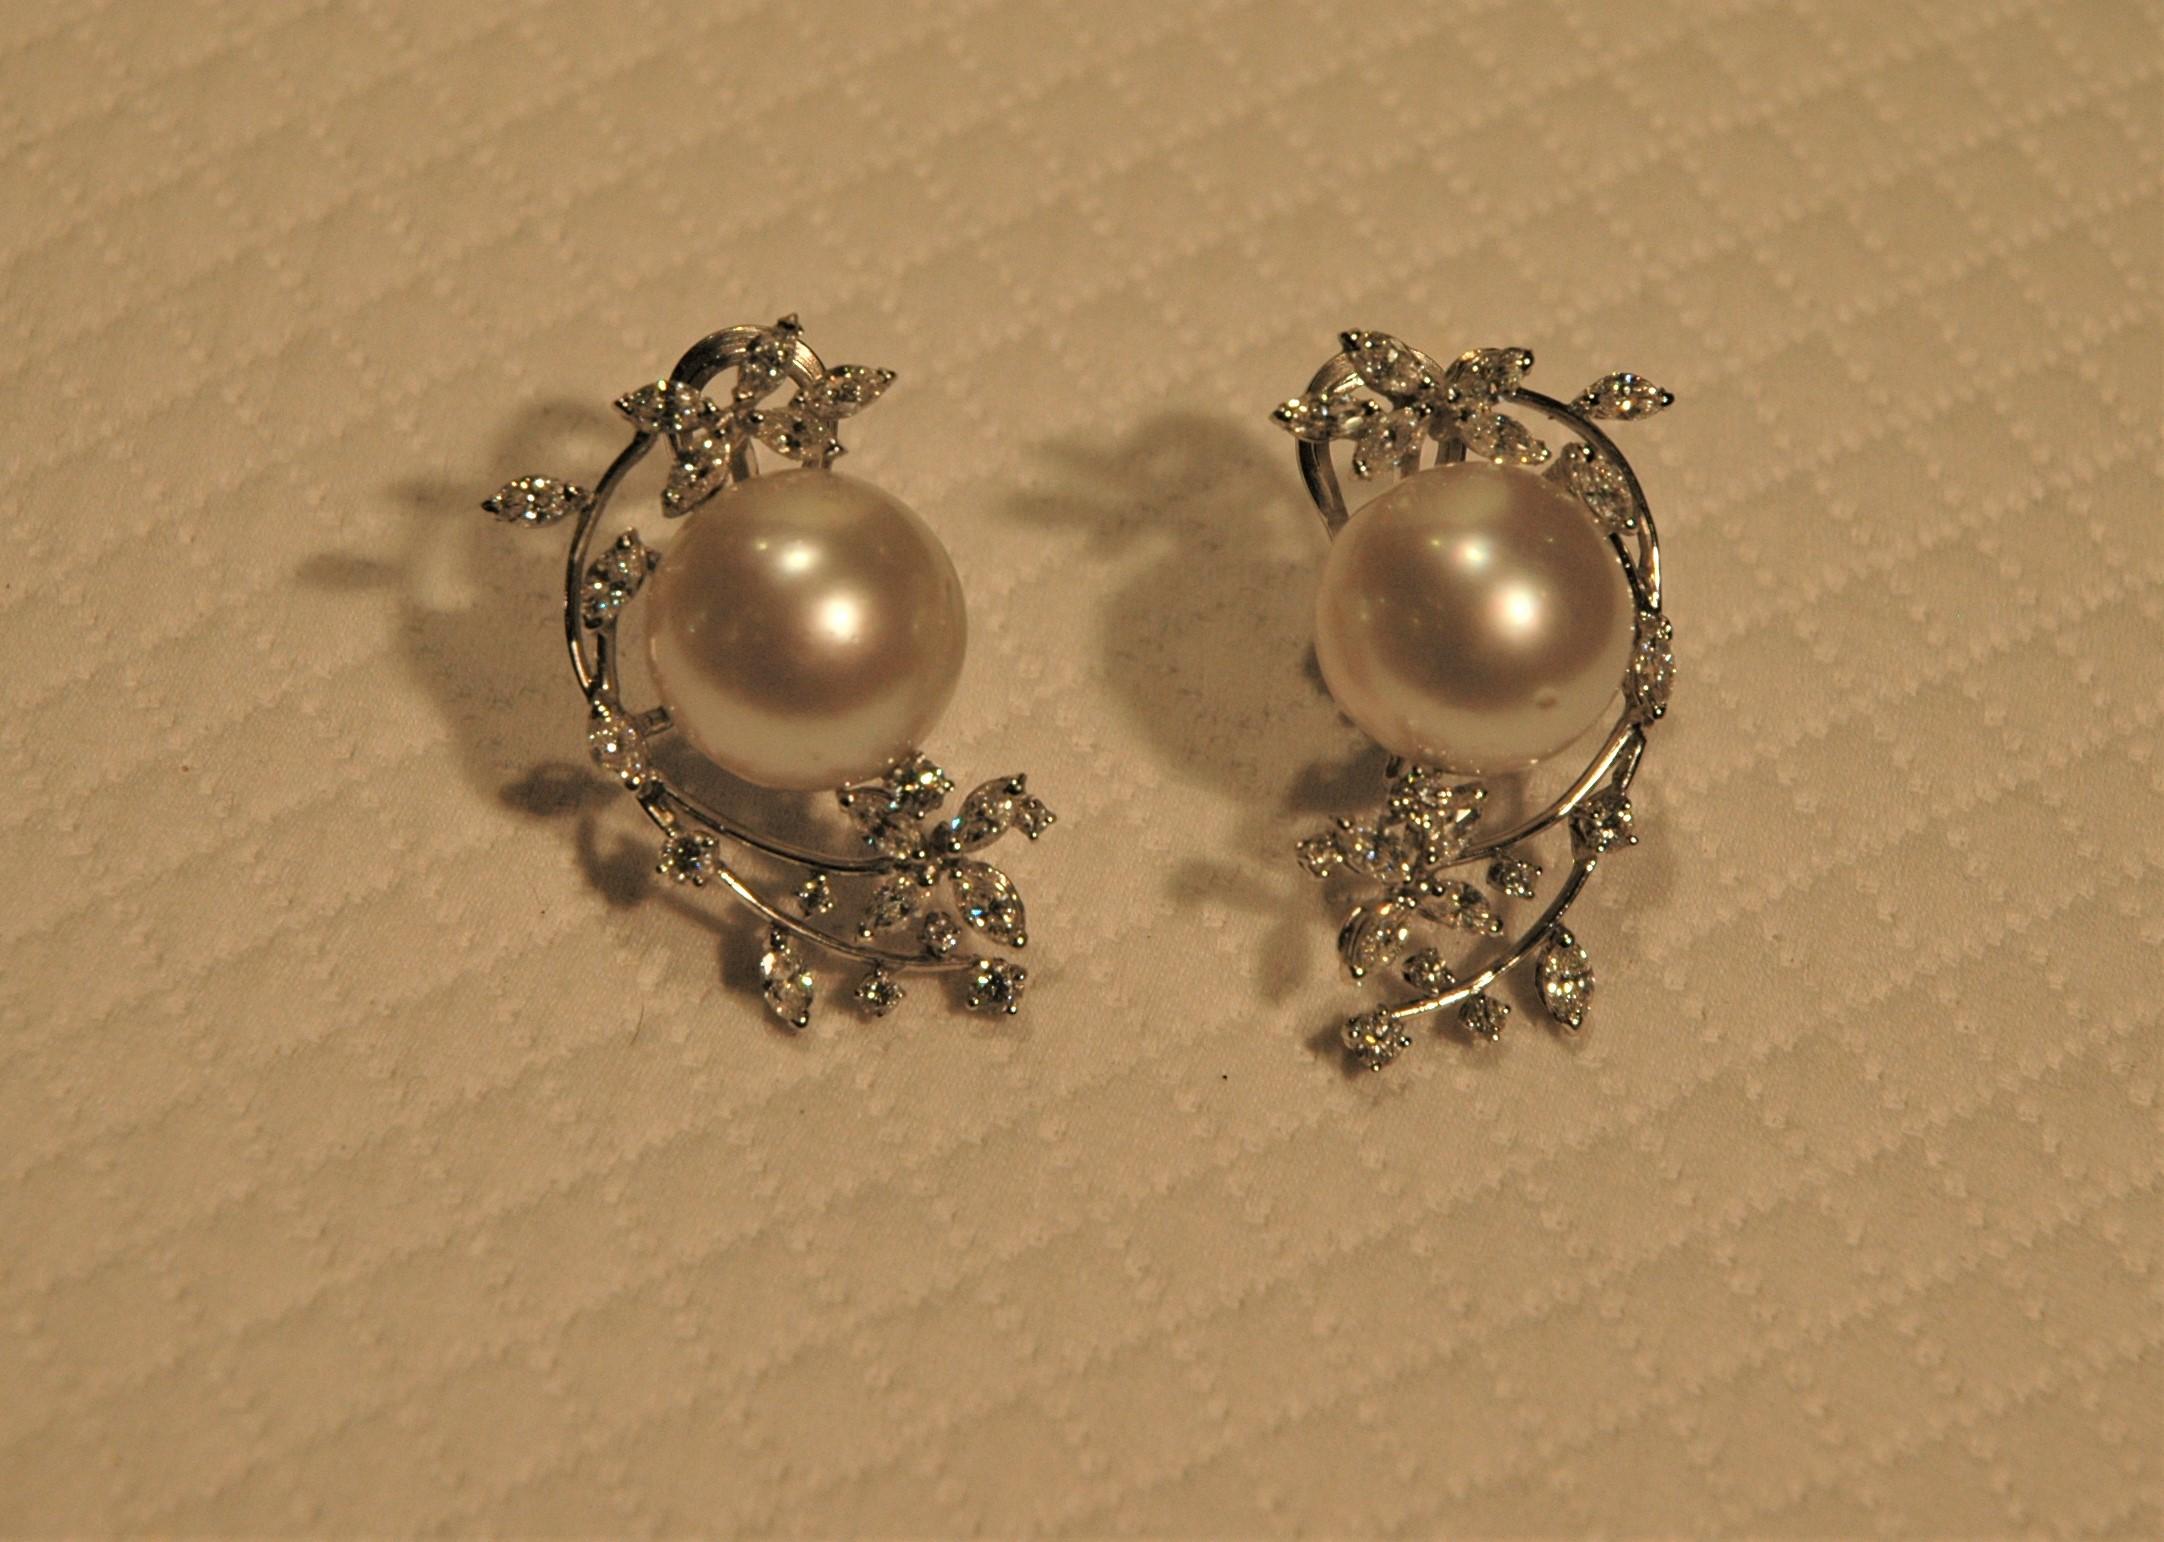 Marquise Cut Stud Earrings 18 Kt White Gold, 2.89 Carats Diamonds and White Australian Pearls For Sale